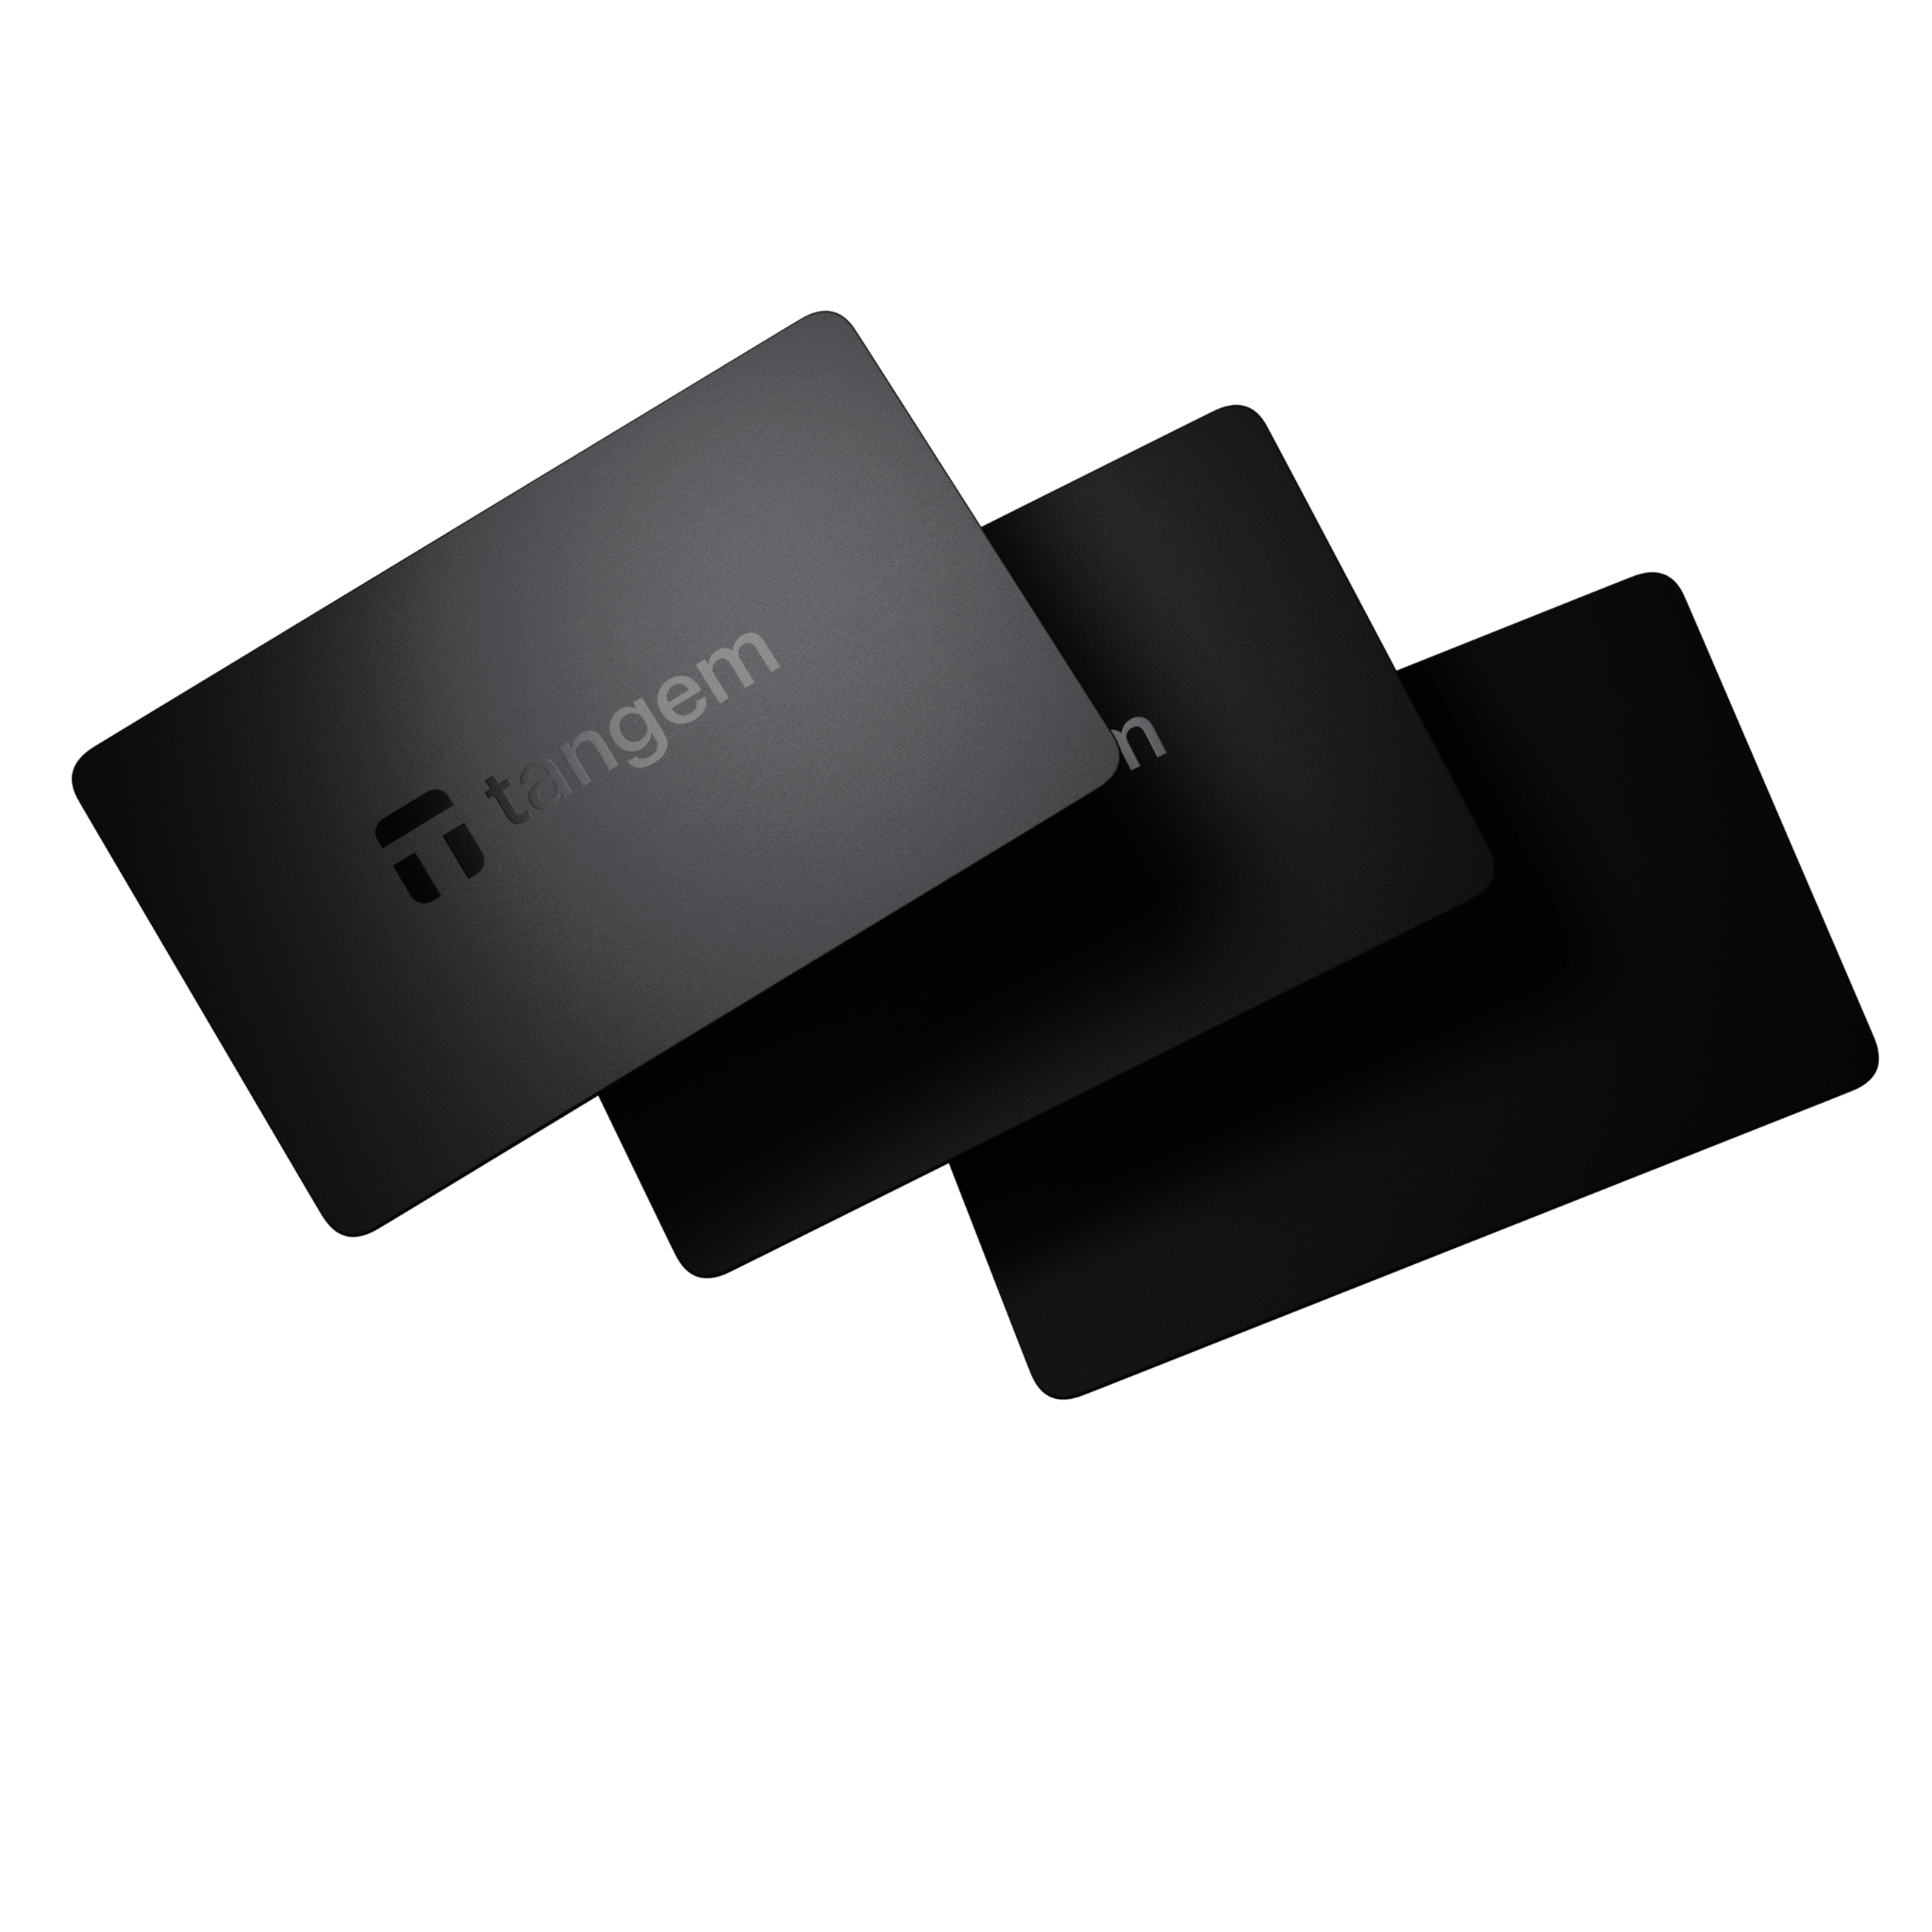 Tangem Wallet 2.0 3 Card Cryptocurrency Hardware Wallet Side Angle